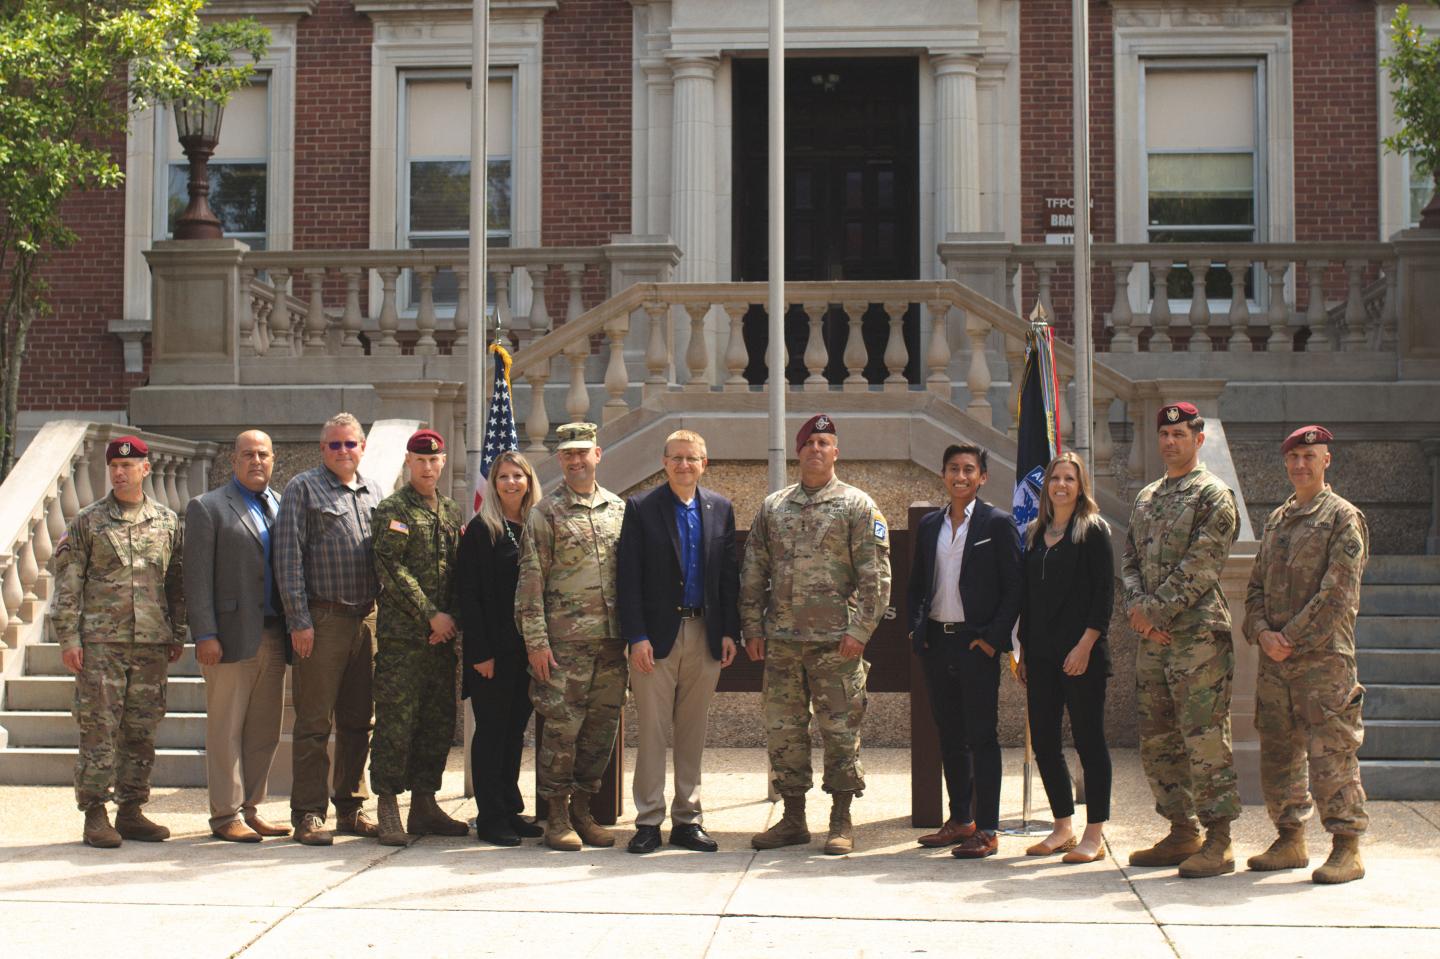 Agreement brings Soldiers, academia together to solve military challenges